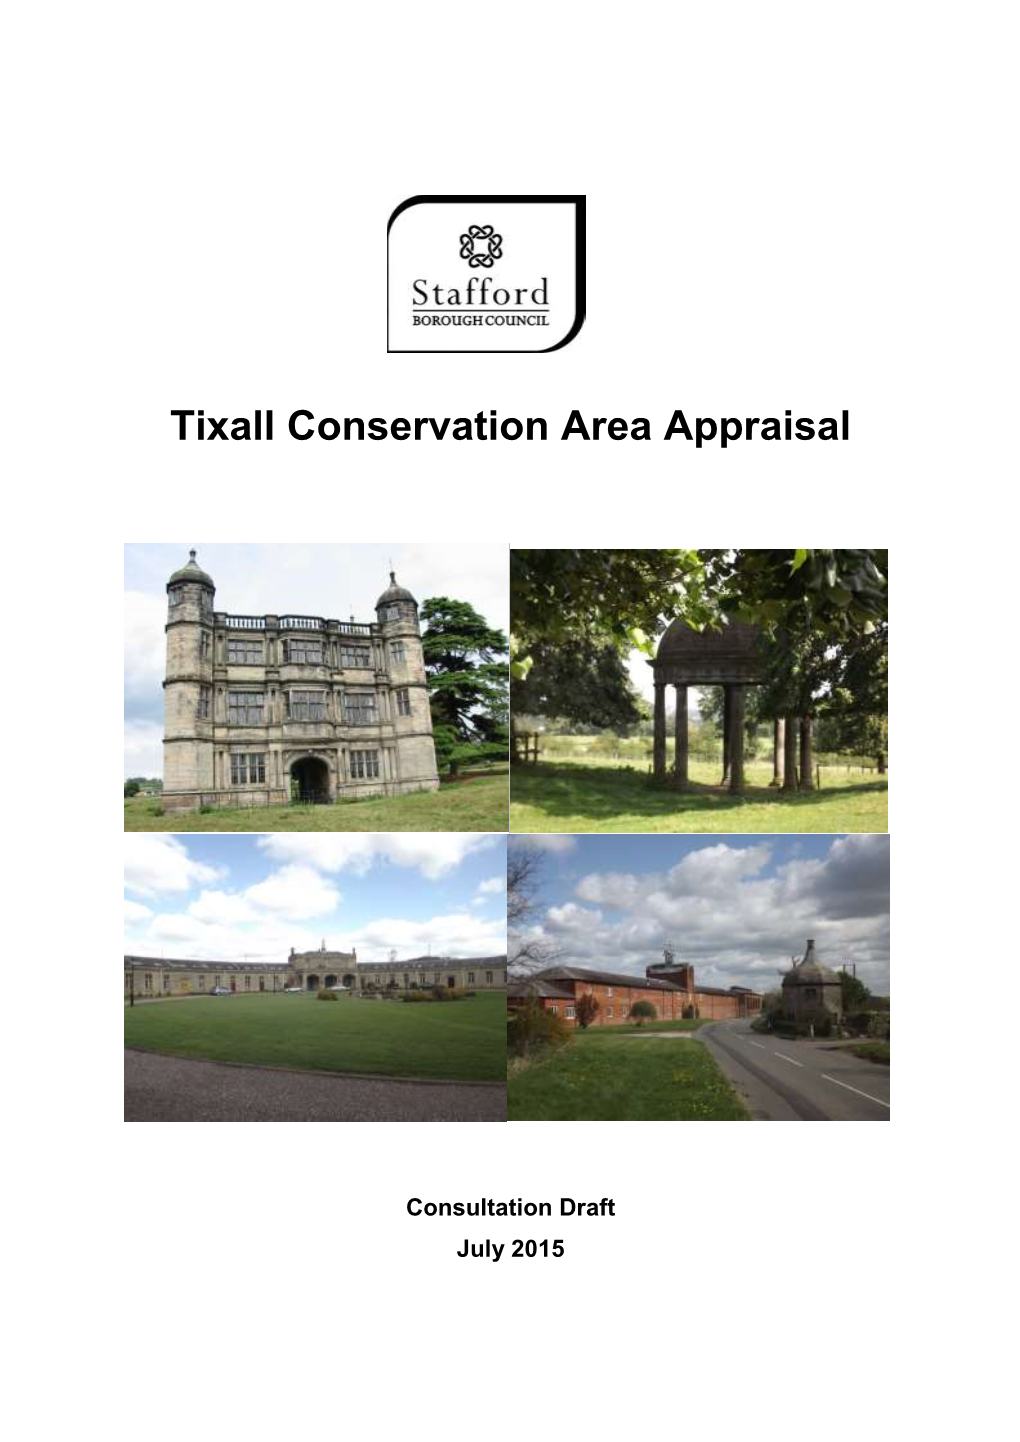 Tixall Conservation Area Appraisal